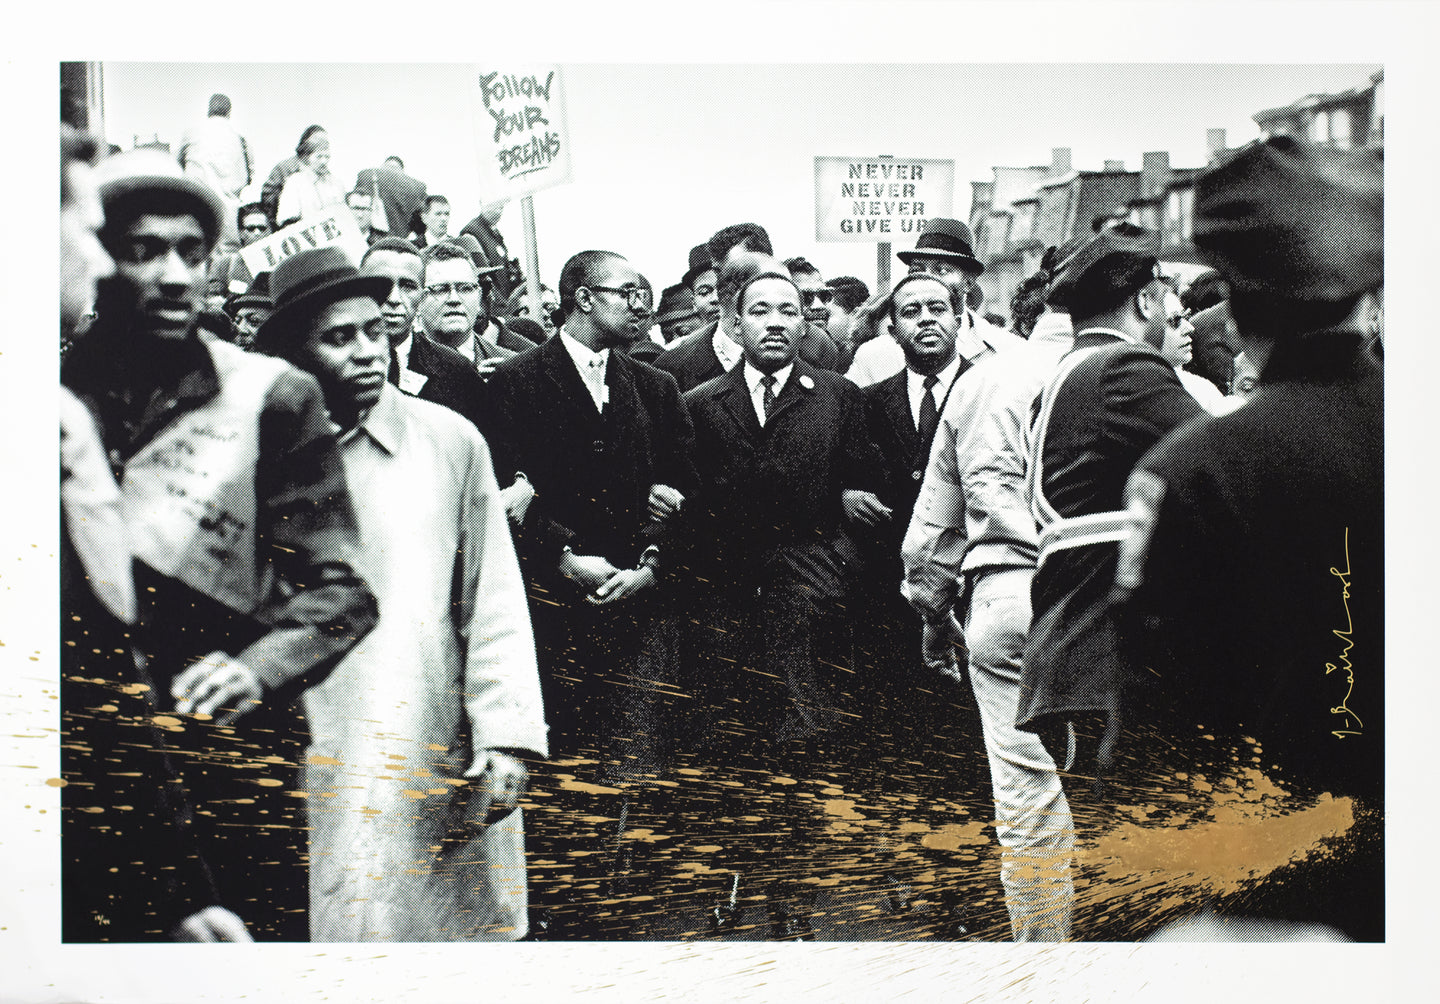 Mr. Brainwash, March for Love Gold, Martin Luther King Art , 2017, Screenprint with Spraypaint on paper, 32.5 x 47 inches, edition of 44, Mr Brainwash print, Mr Brainwash Art for sale at Manolis Projects Art Gallery, Miami, Fl